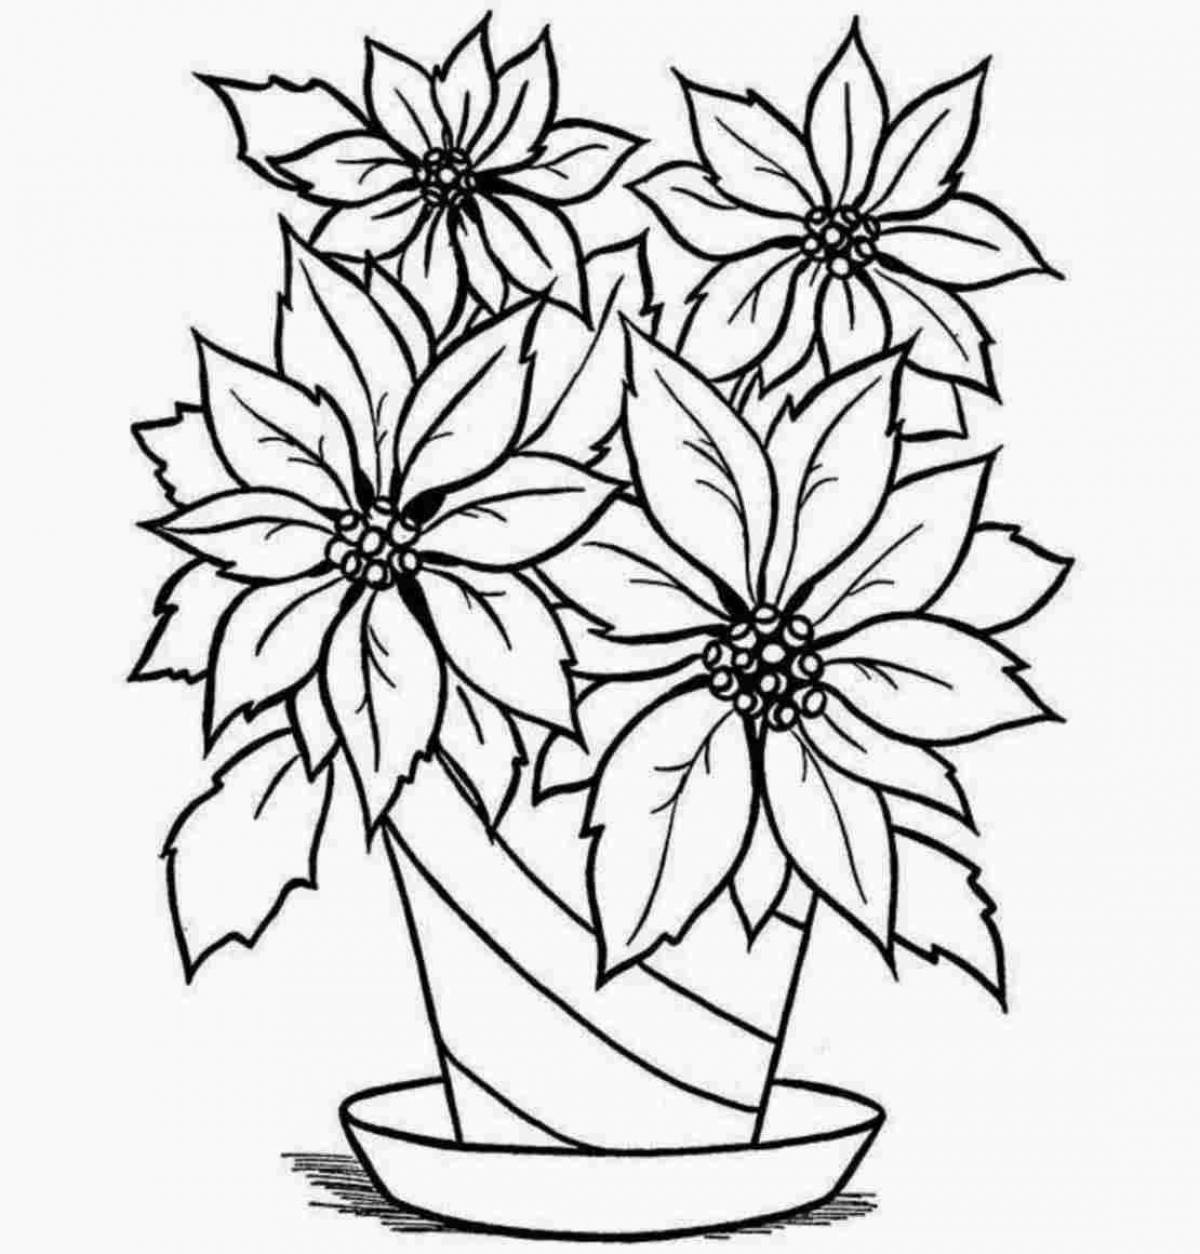 Shine flowers coloring book